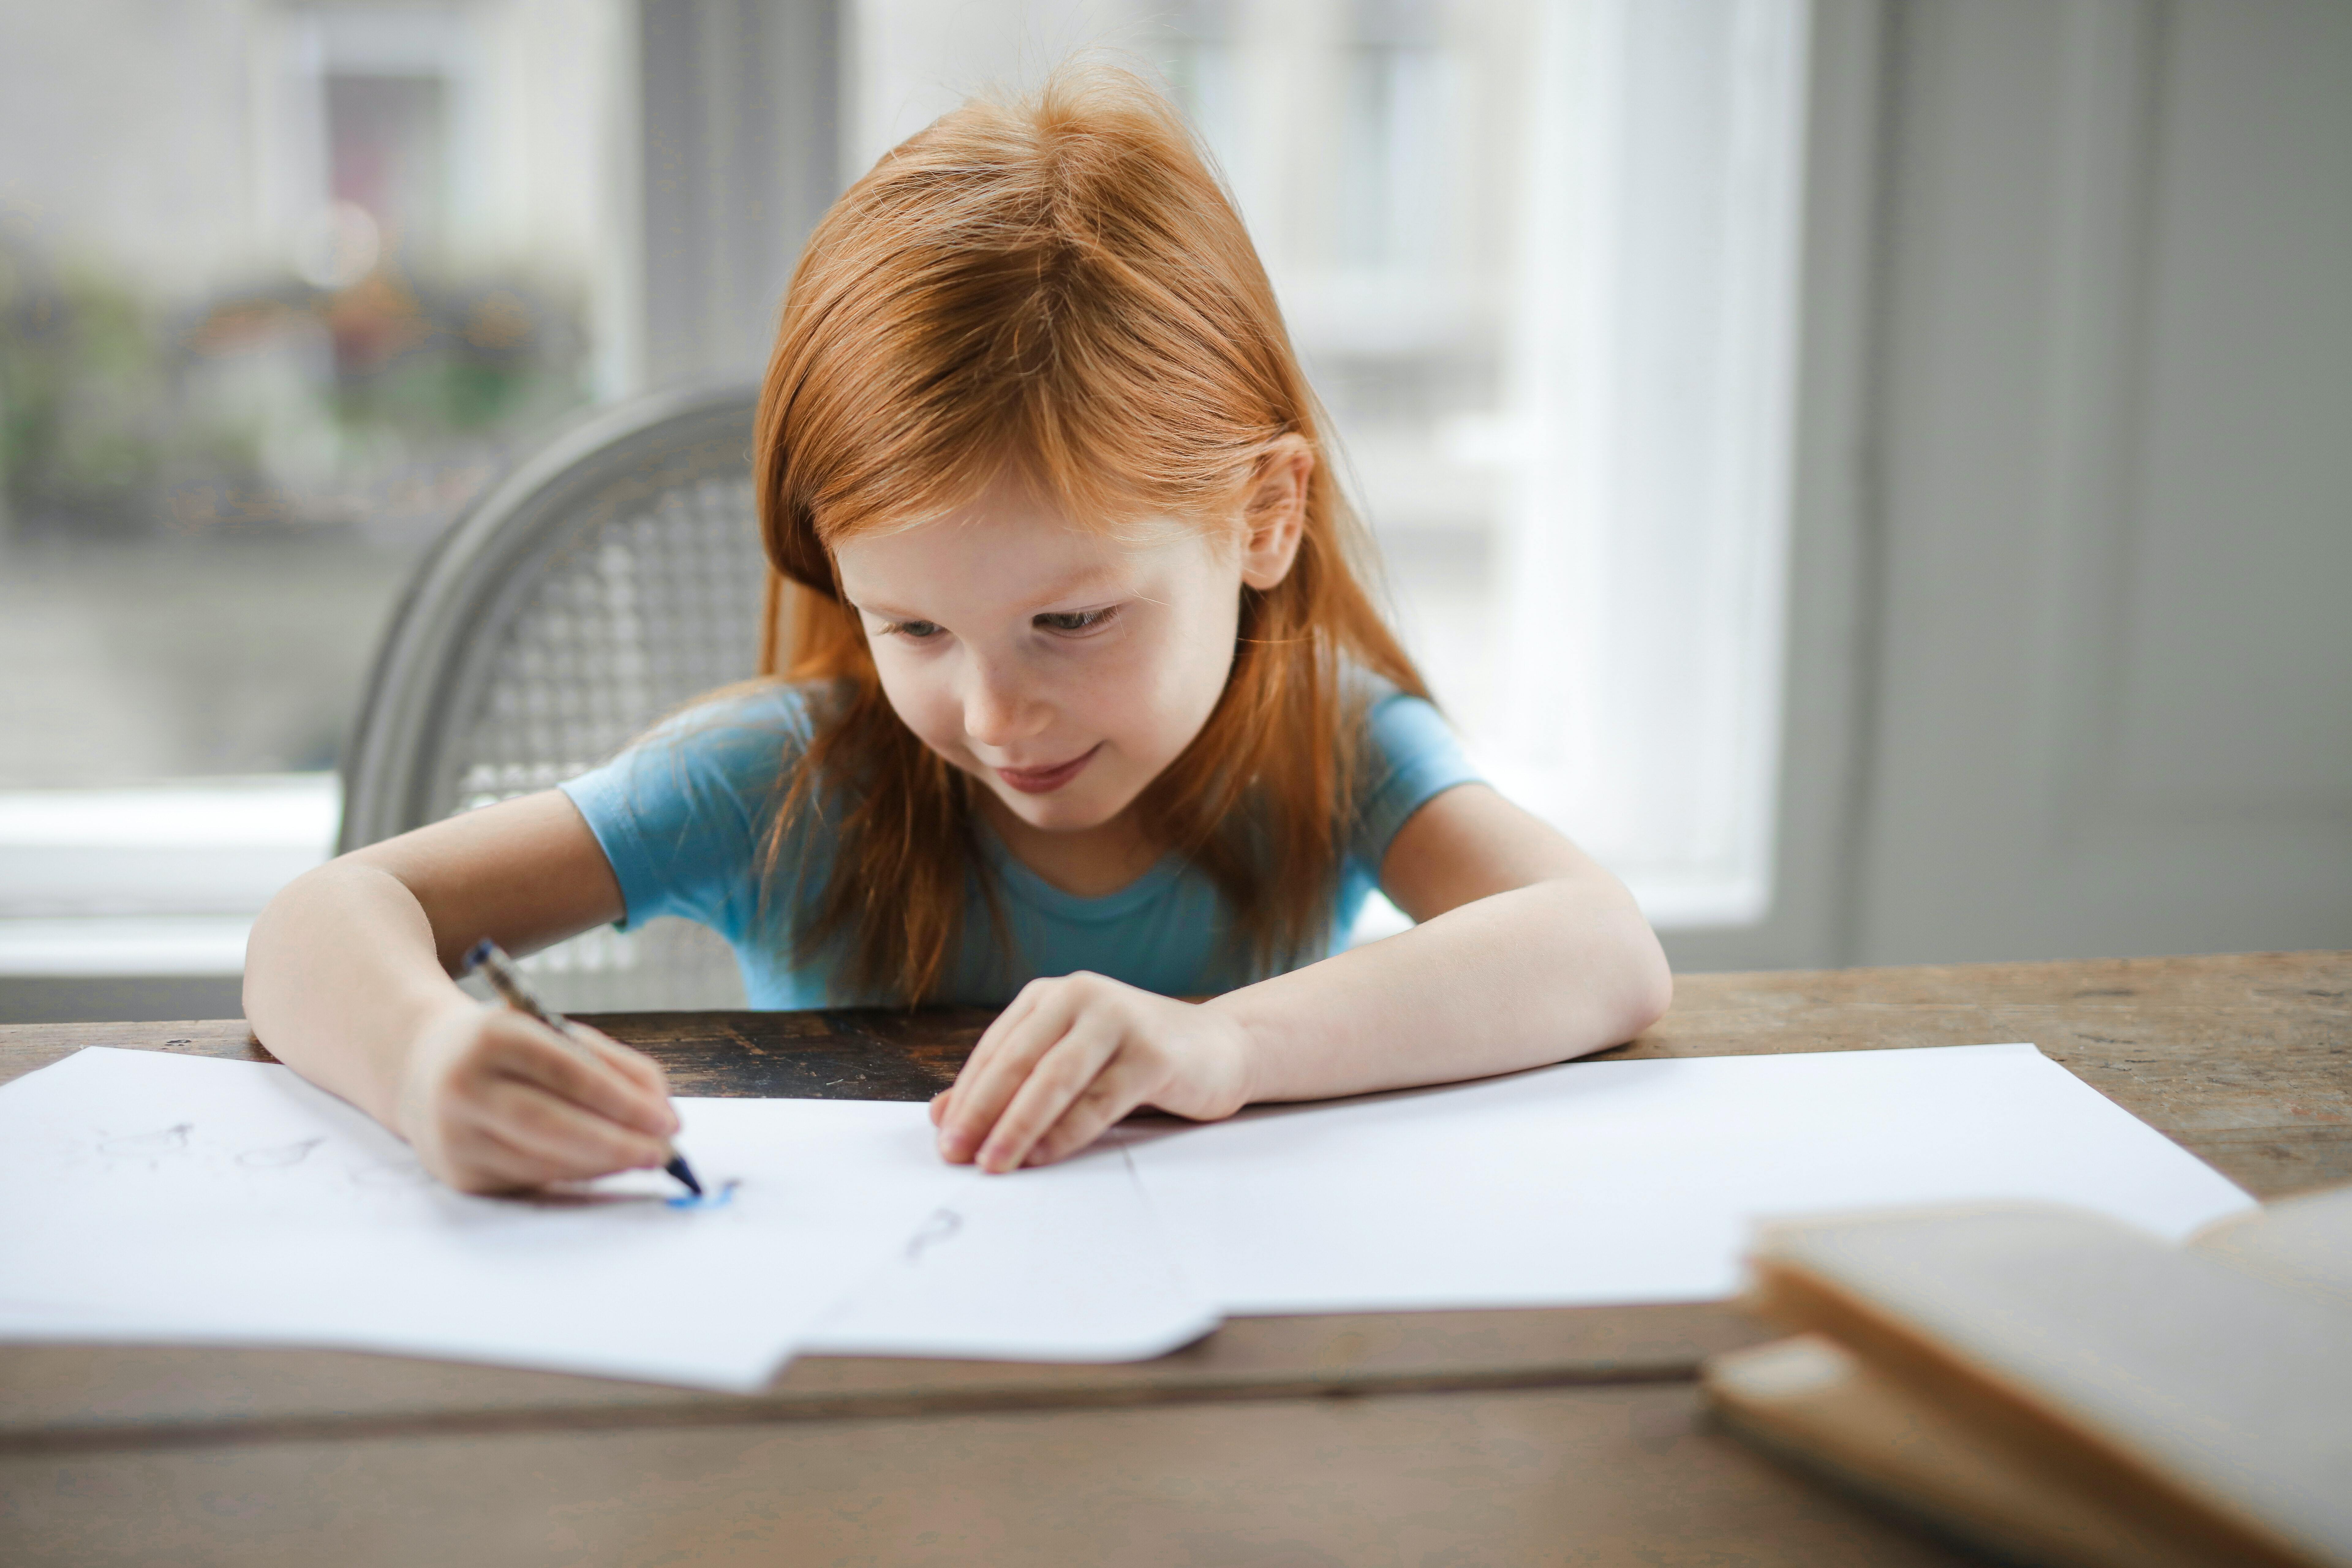 A female child writing on a book